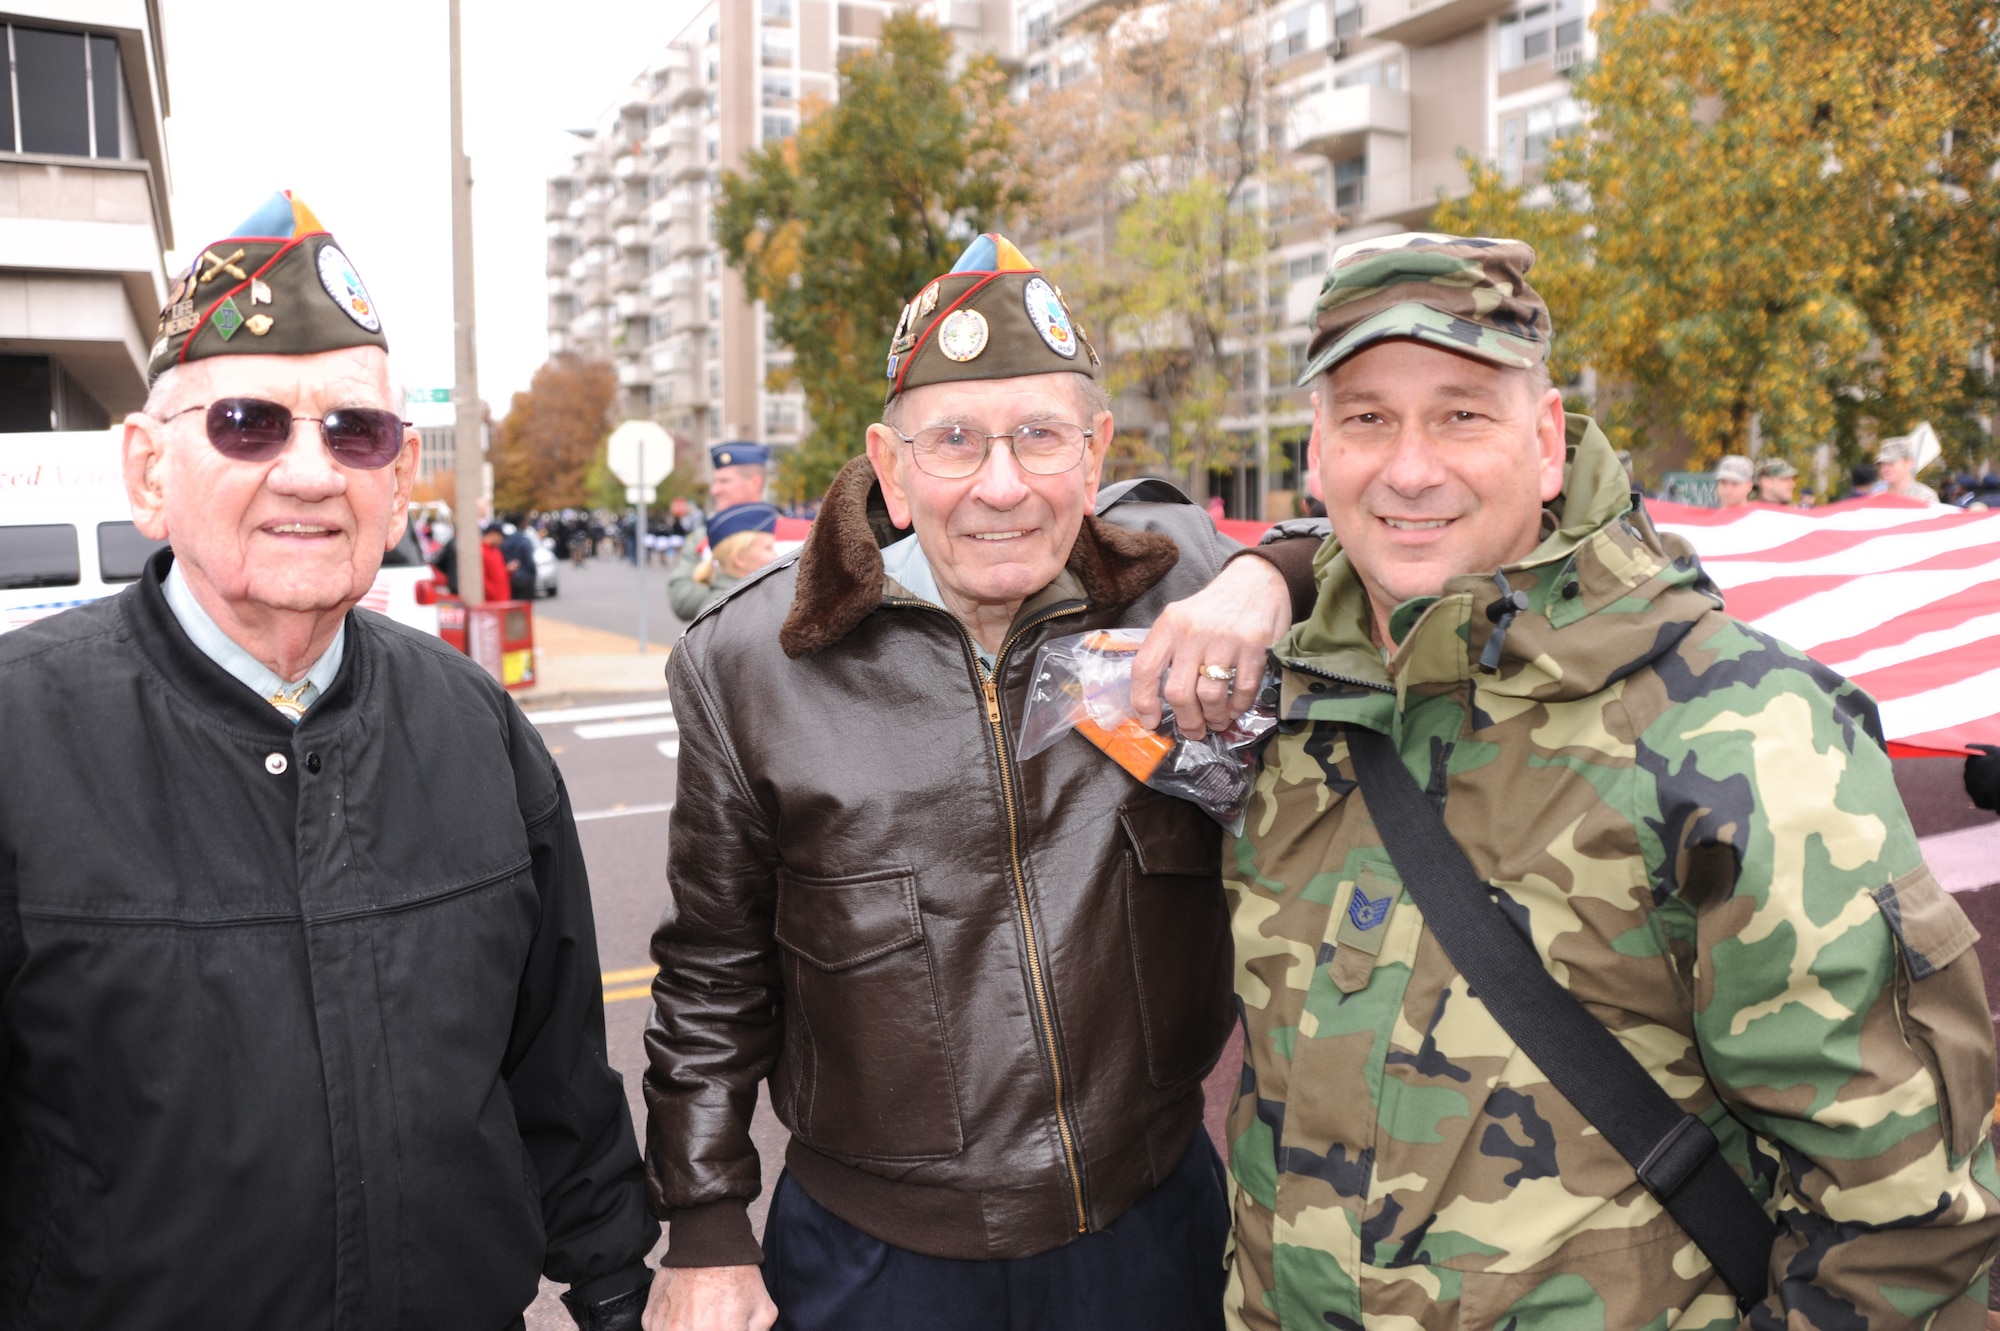 932nd Airlift Wing member Tech. Sgt. Gerald Sonnenberg met with two World War II veterans moments before participating in the 2008 Veteran's Parade in downtown St. Louis.  He has a degree in history and enjoyed meeting these veterans from America's treasured past.  (U.S. Air Force photo/Maj. Stan Paregien)